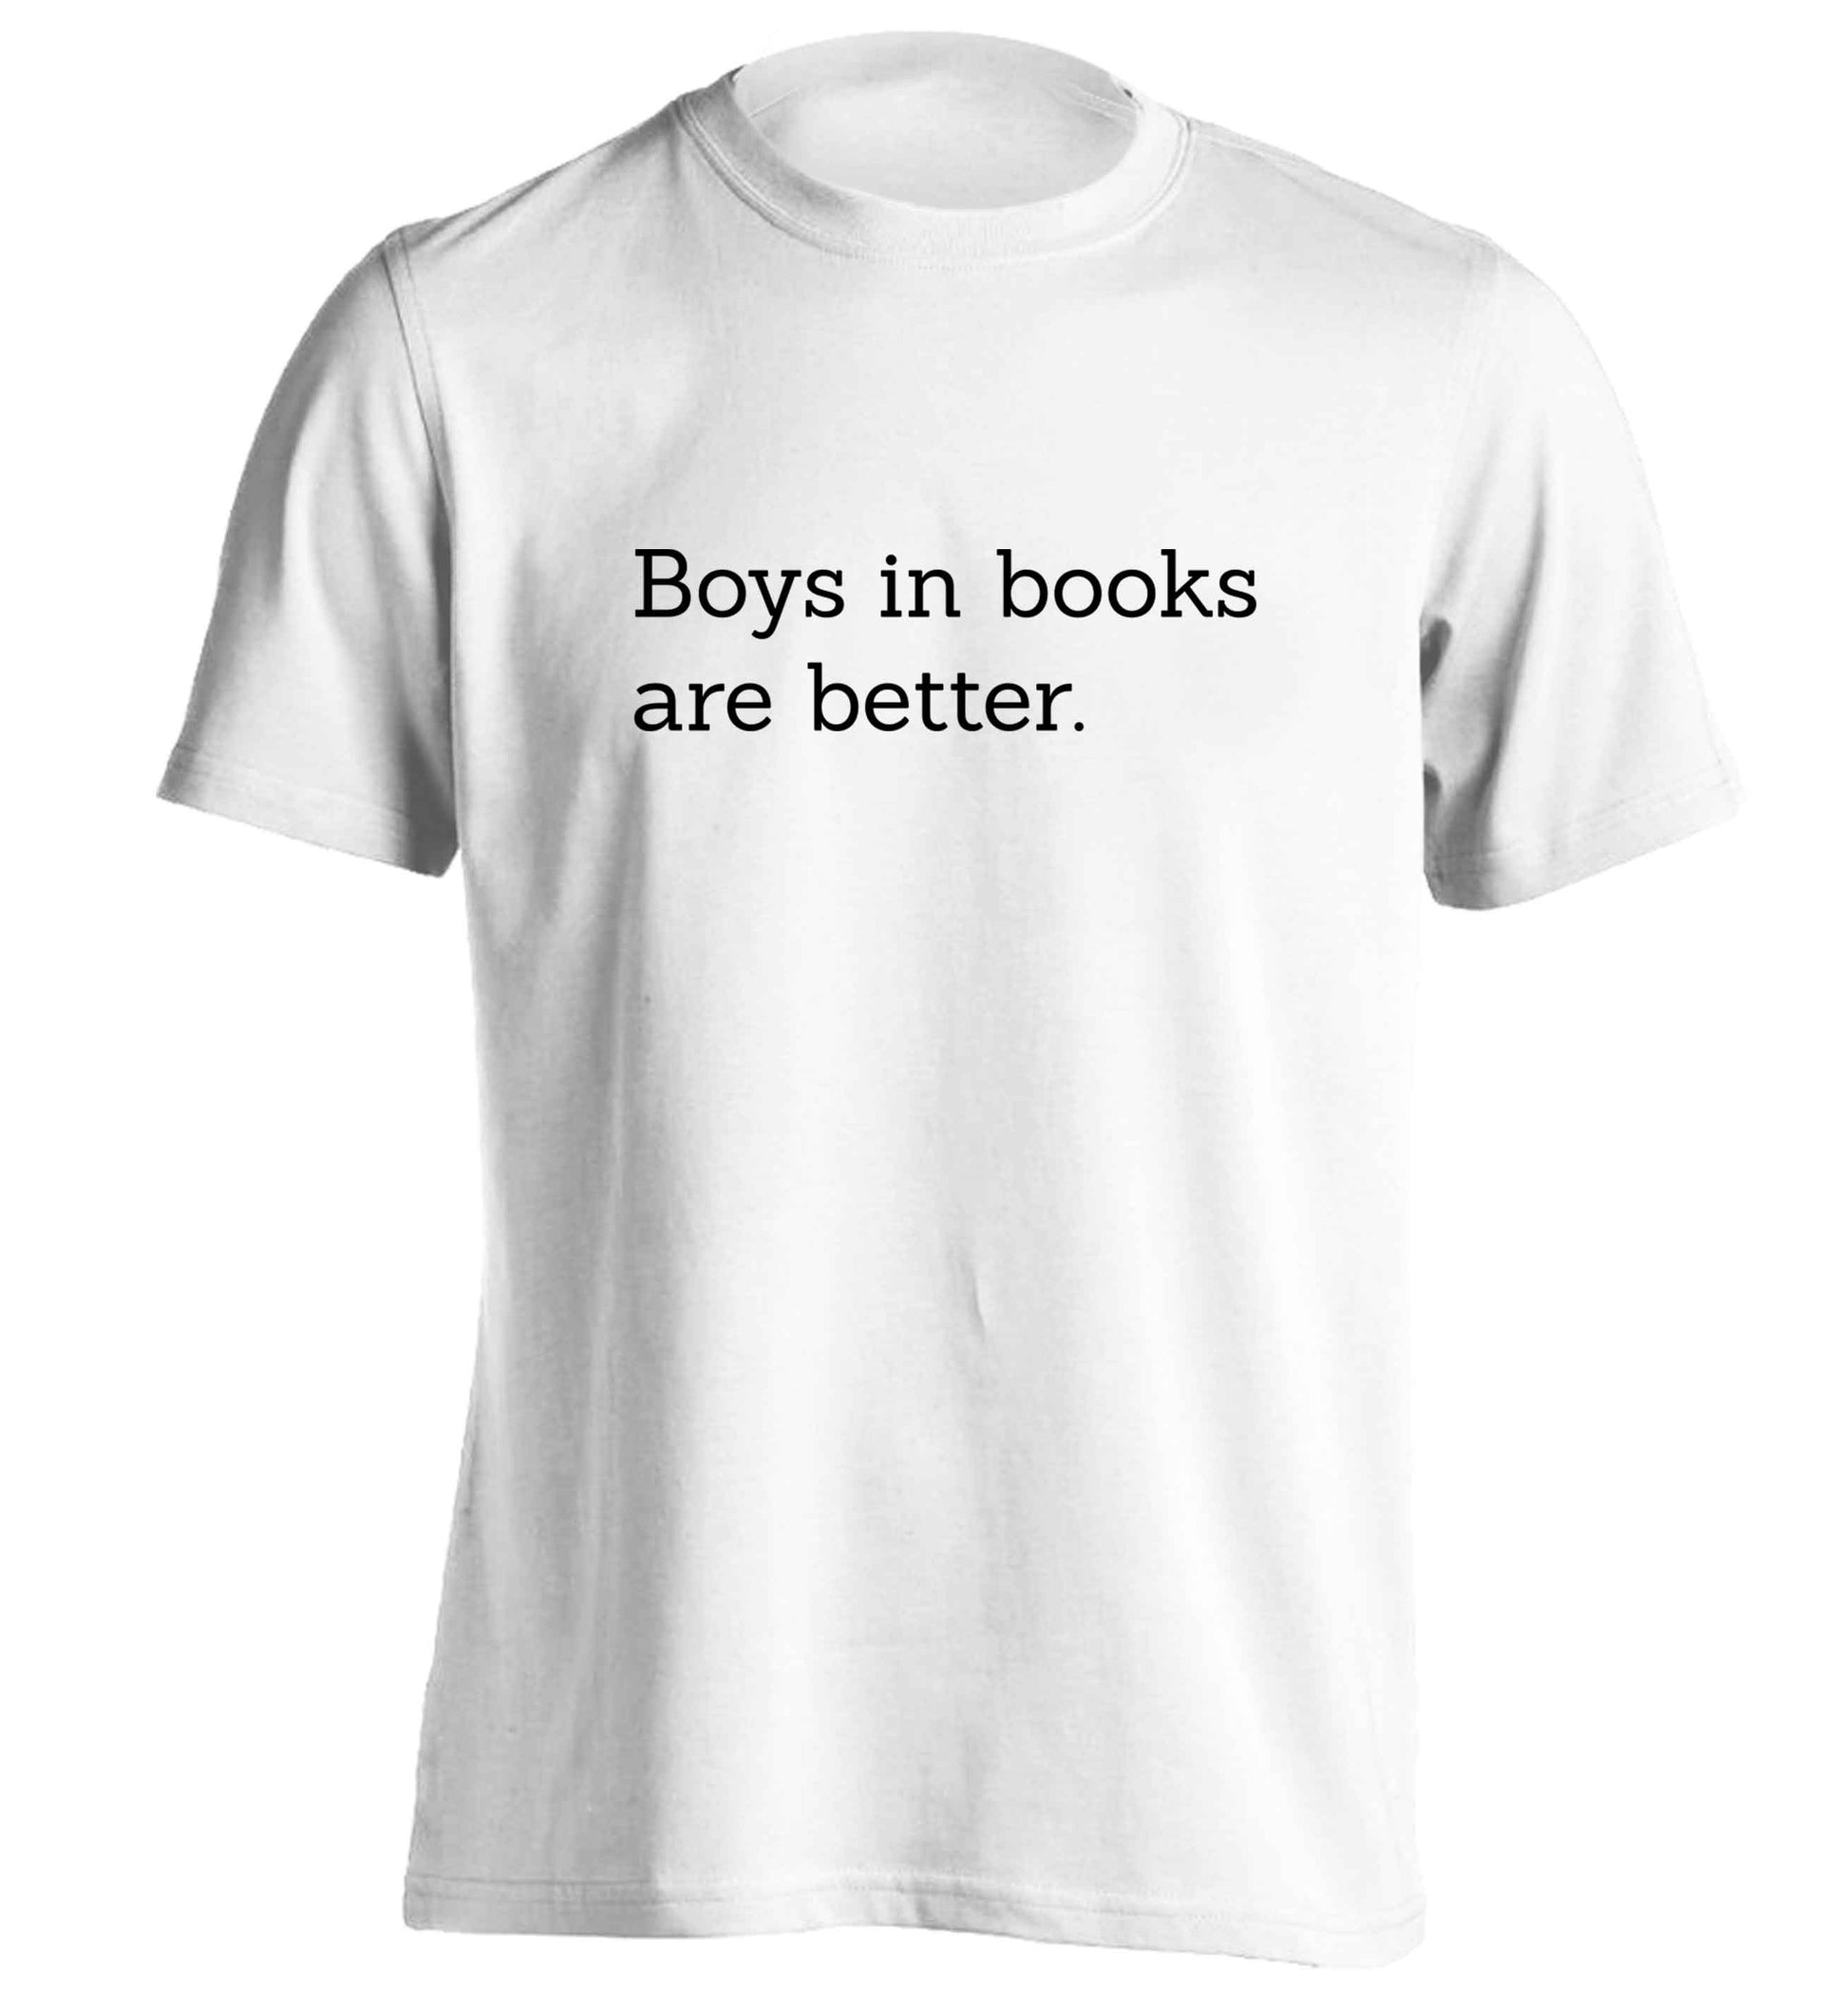 Boys in books are better adults unisex white Tshirt 2XL